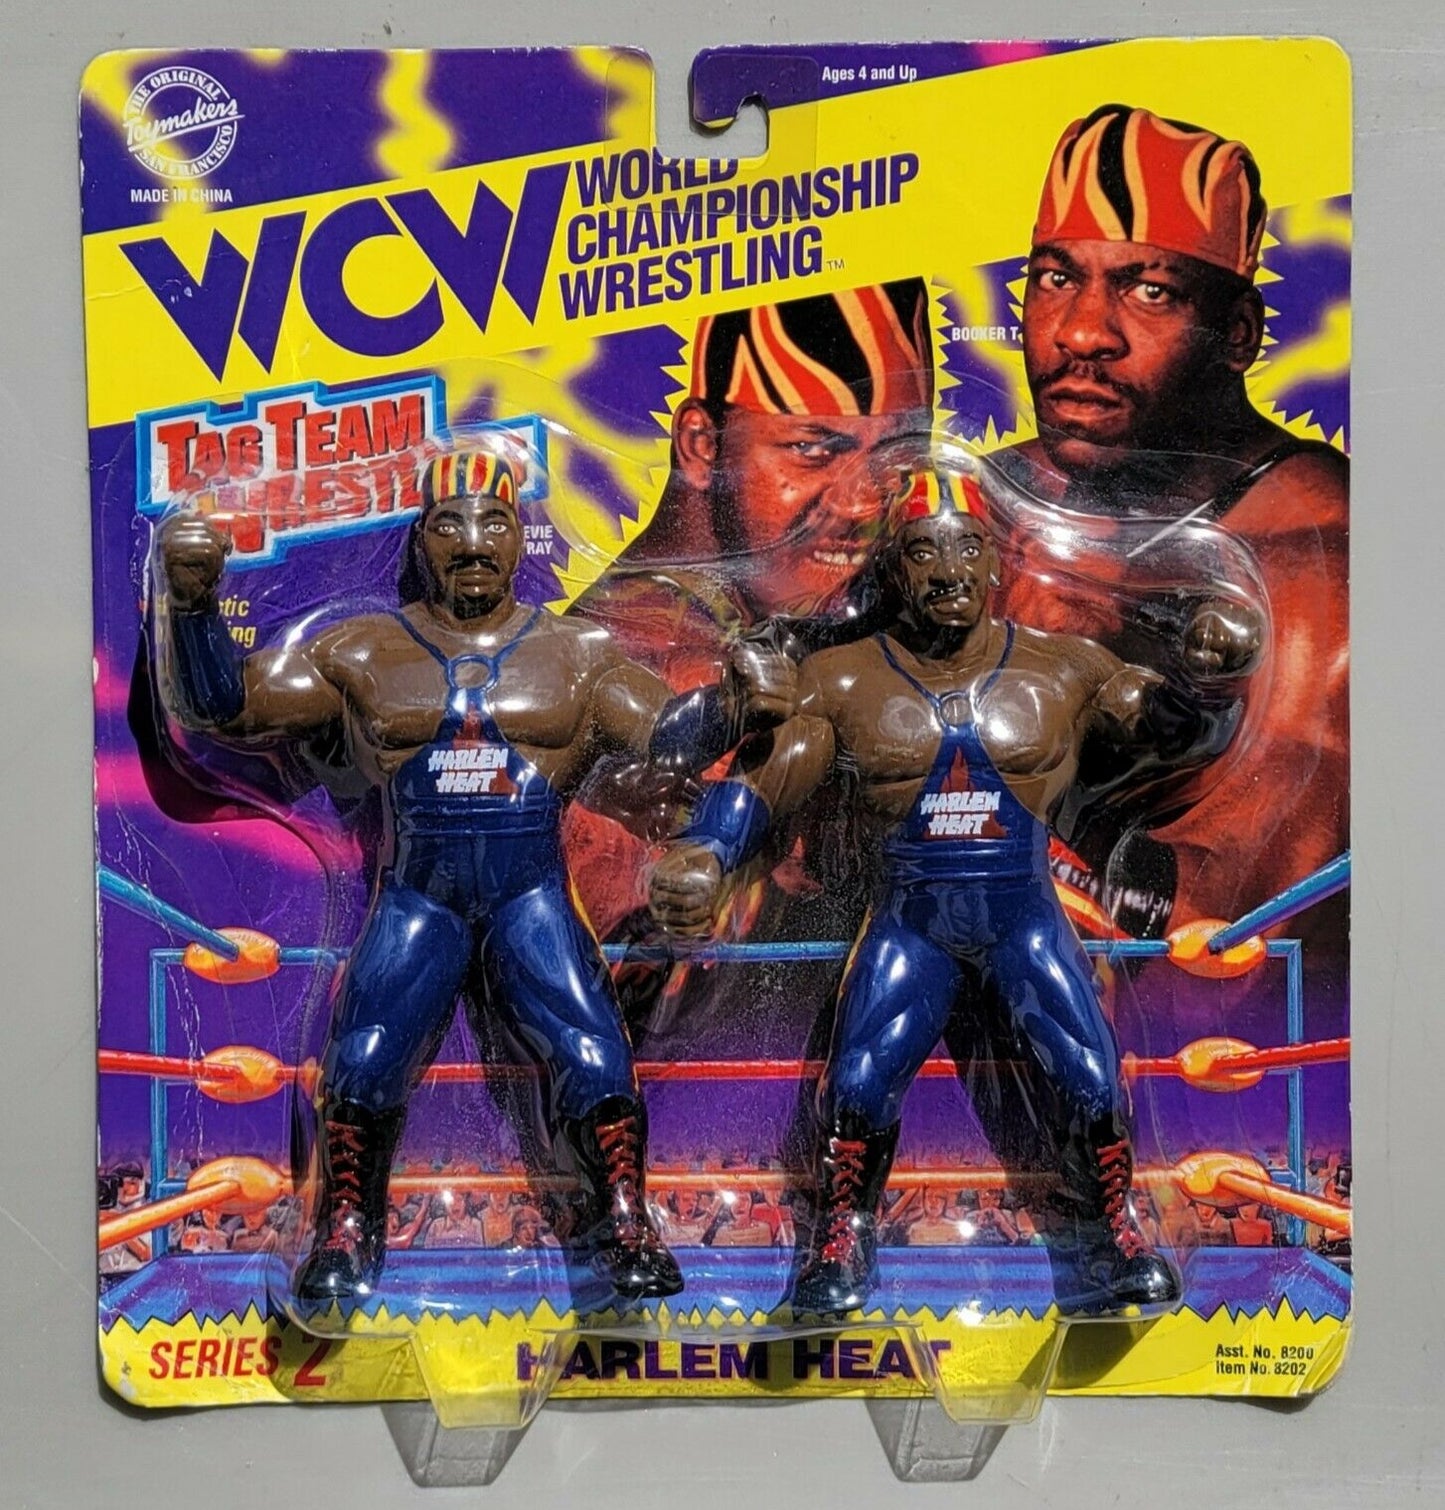 1996 WCW OSFTM Collectible Wrestlers [LJN Style] Tag Team Wrestlers Series 3 Harlem Heat: Stevie Ray & Booker T [With Blue Gear, Exclusive]